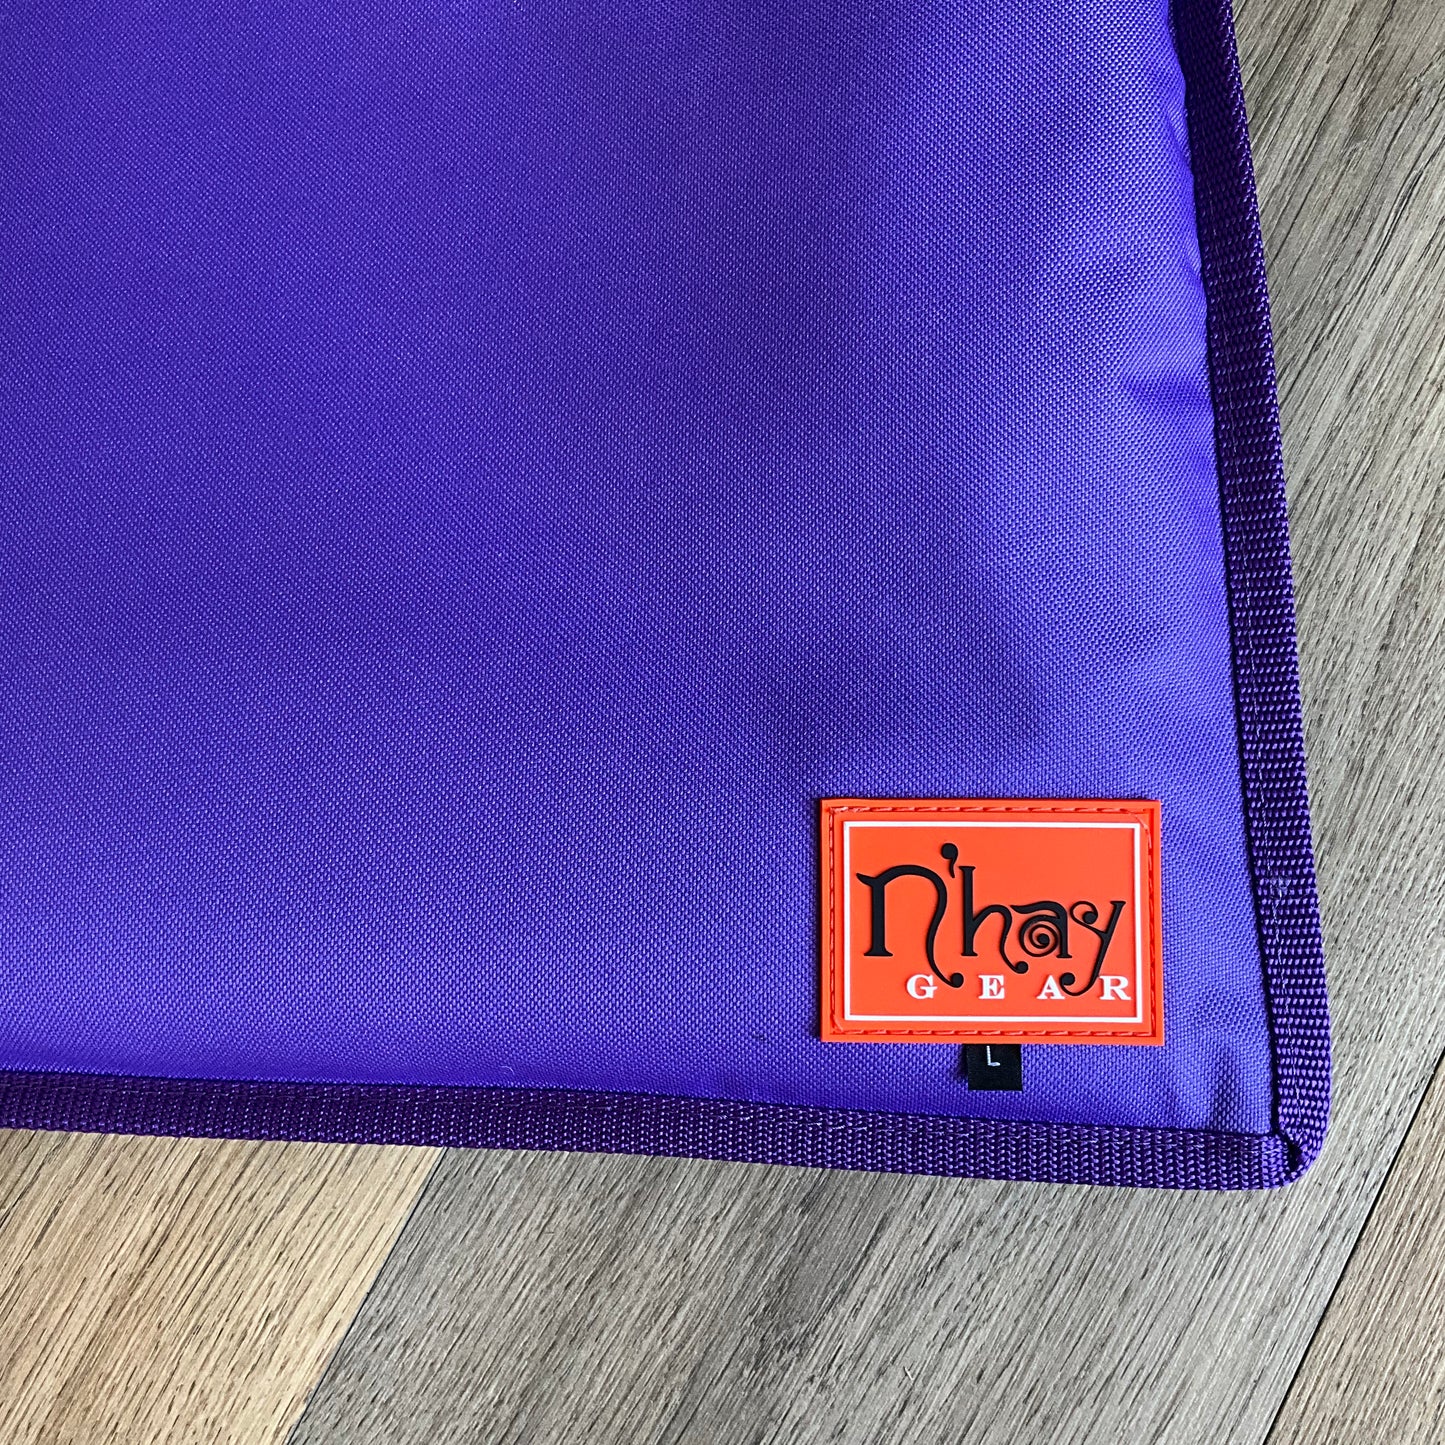 N'hay Gear Dog Bed - Foam Mattress and Acrylic Canvas Cover